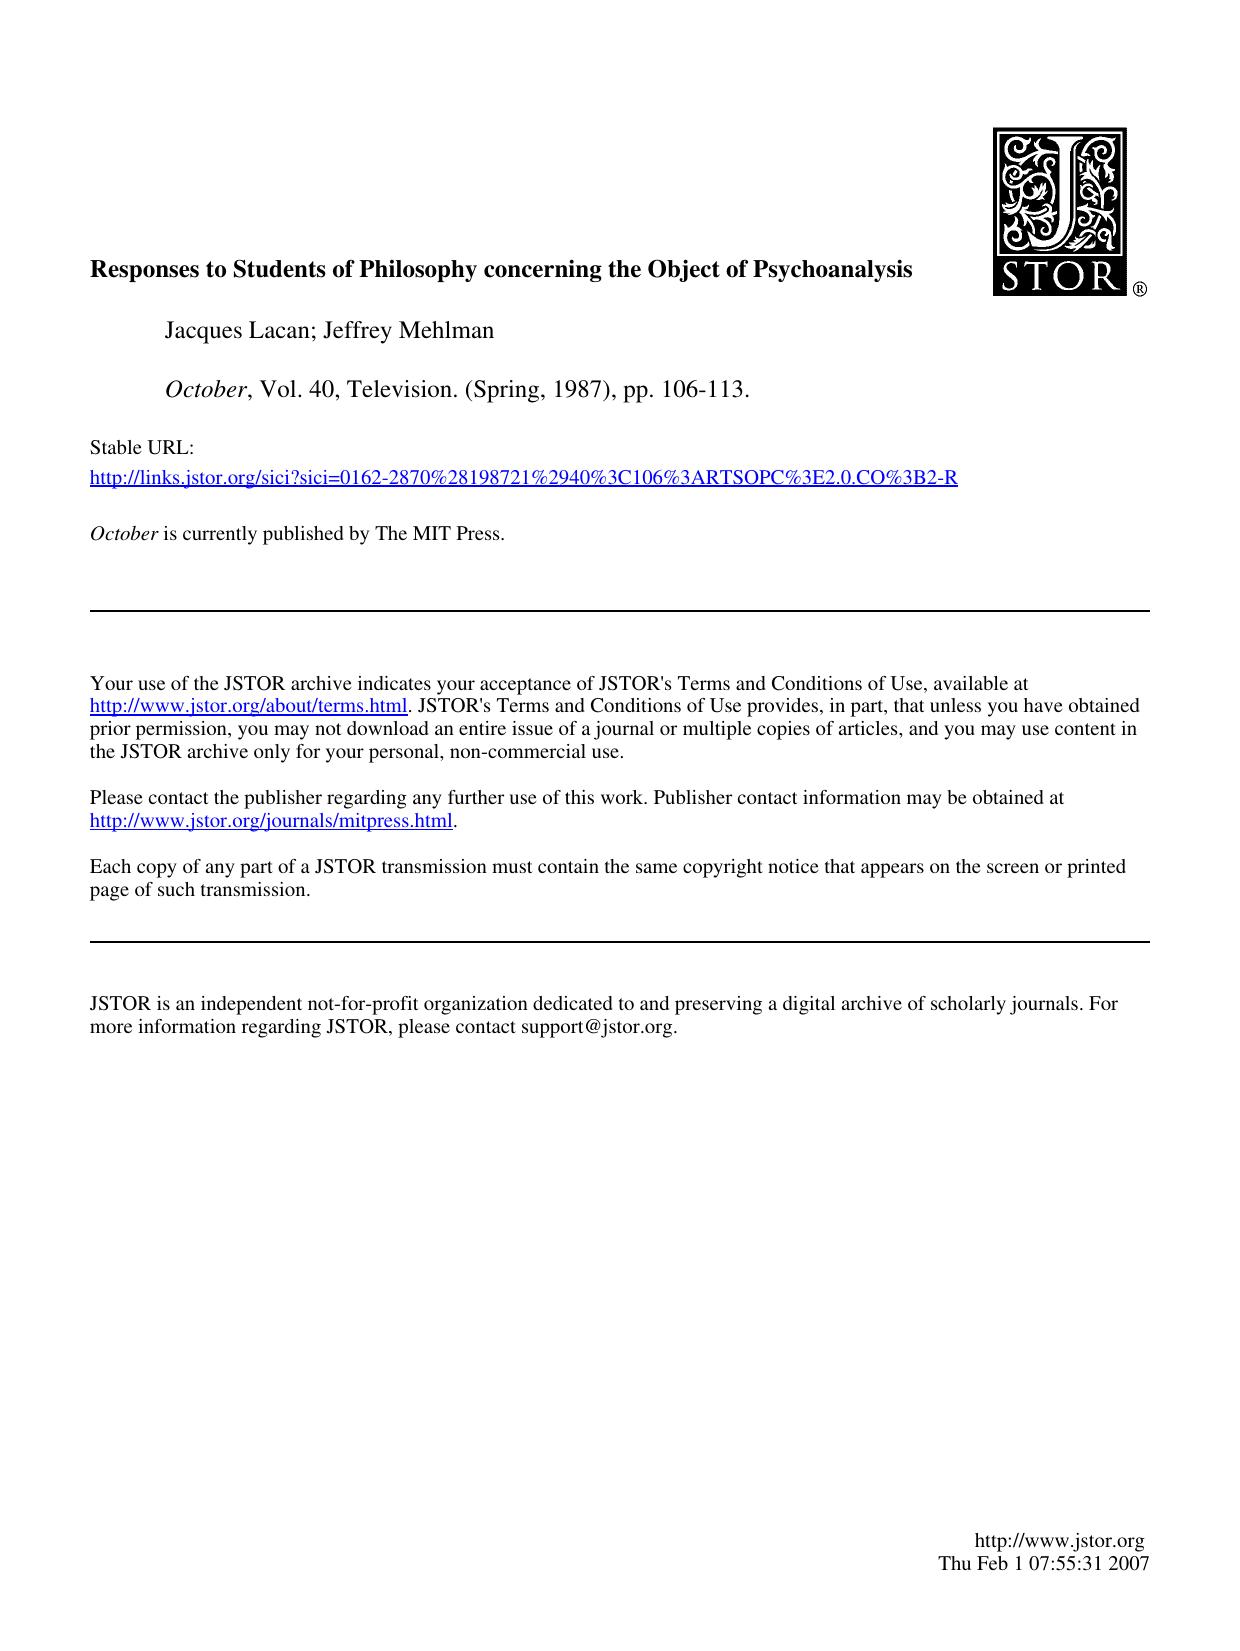 Responses To Students Of Philosophy Concerning The Object Of Psychoanalysis - Paper